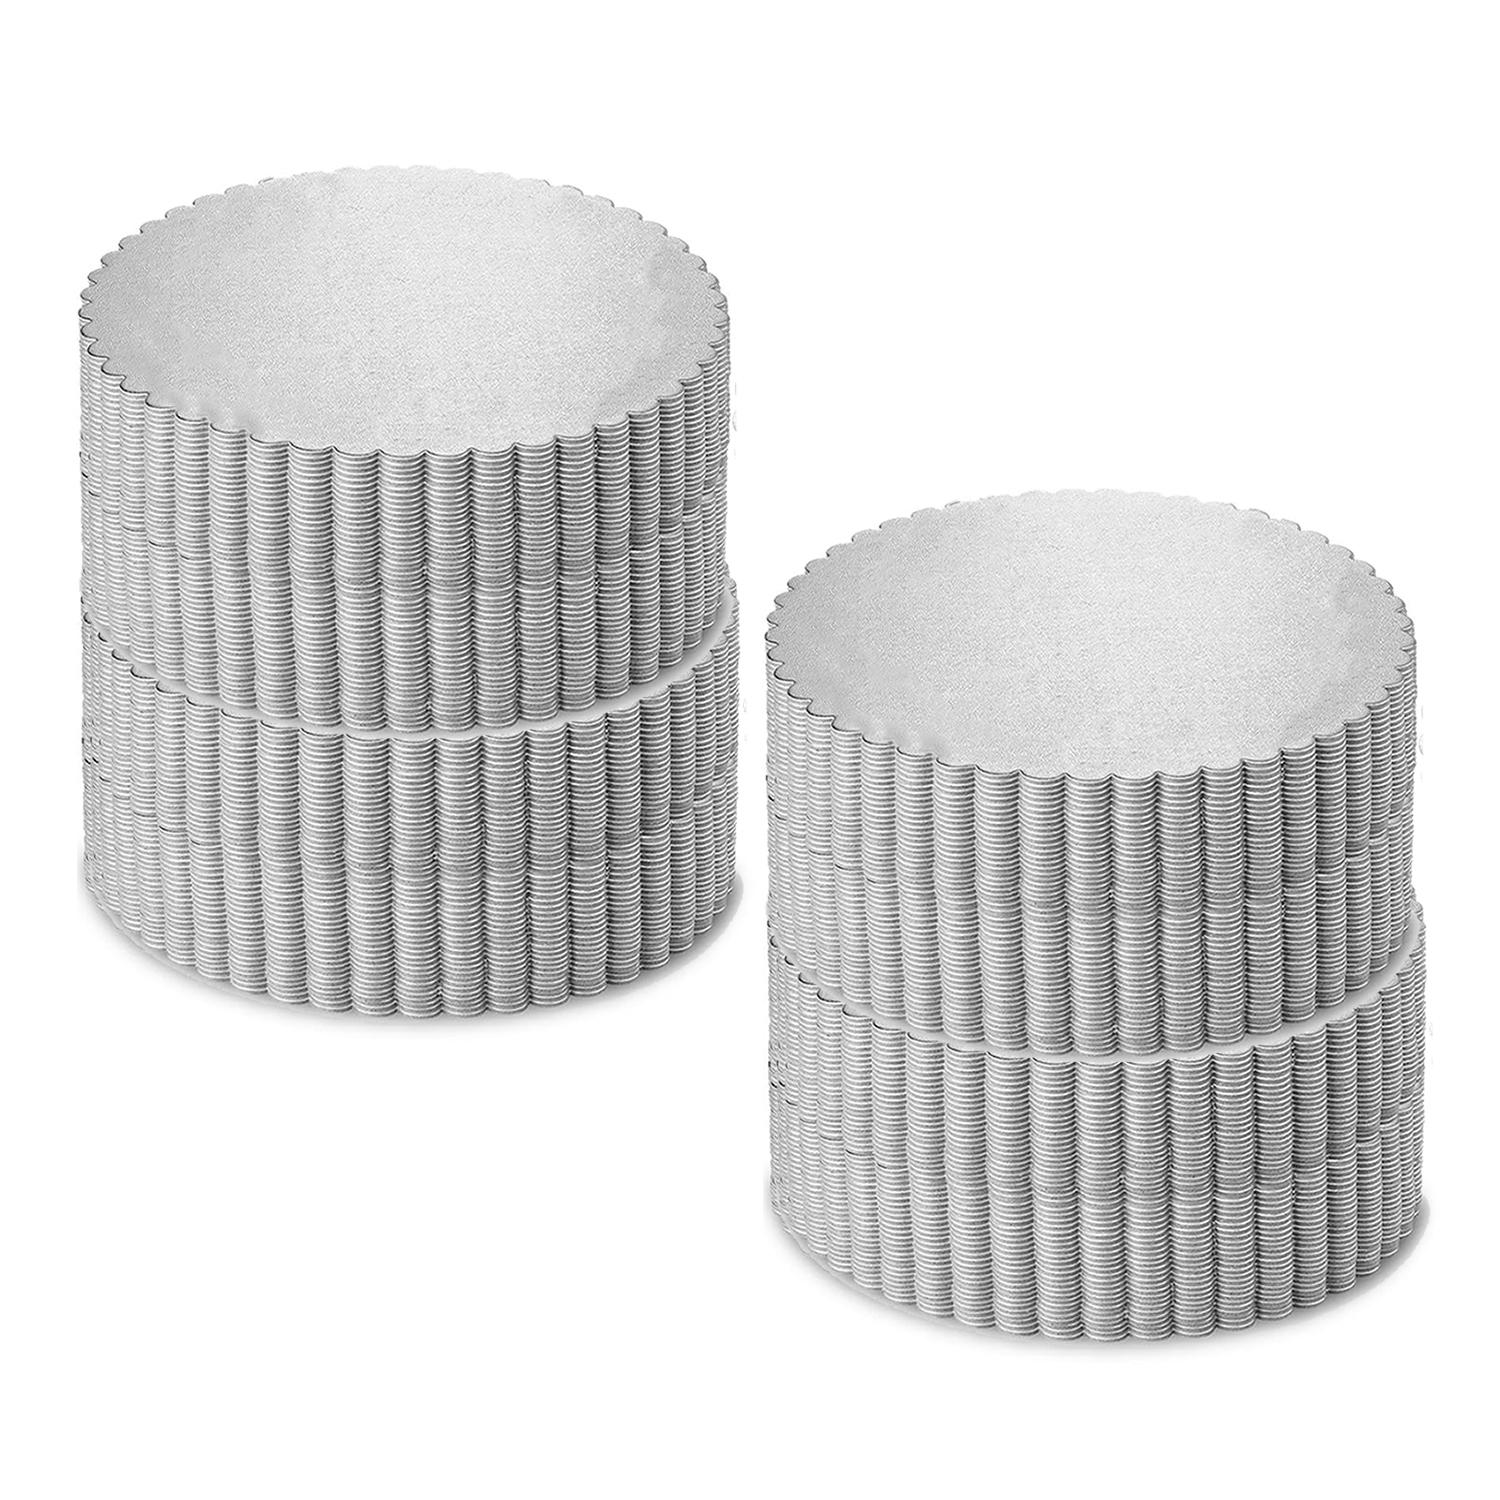 PACK OF 100 - 10'' ROUND SCALLOPED SILVER CAKE BOARD